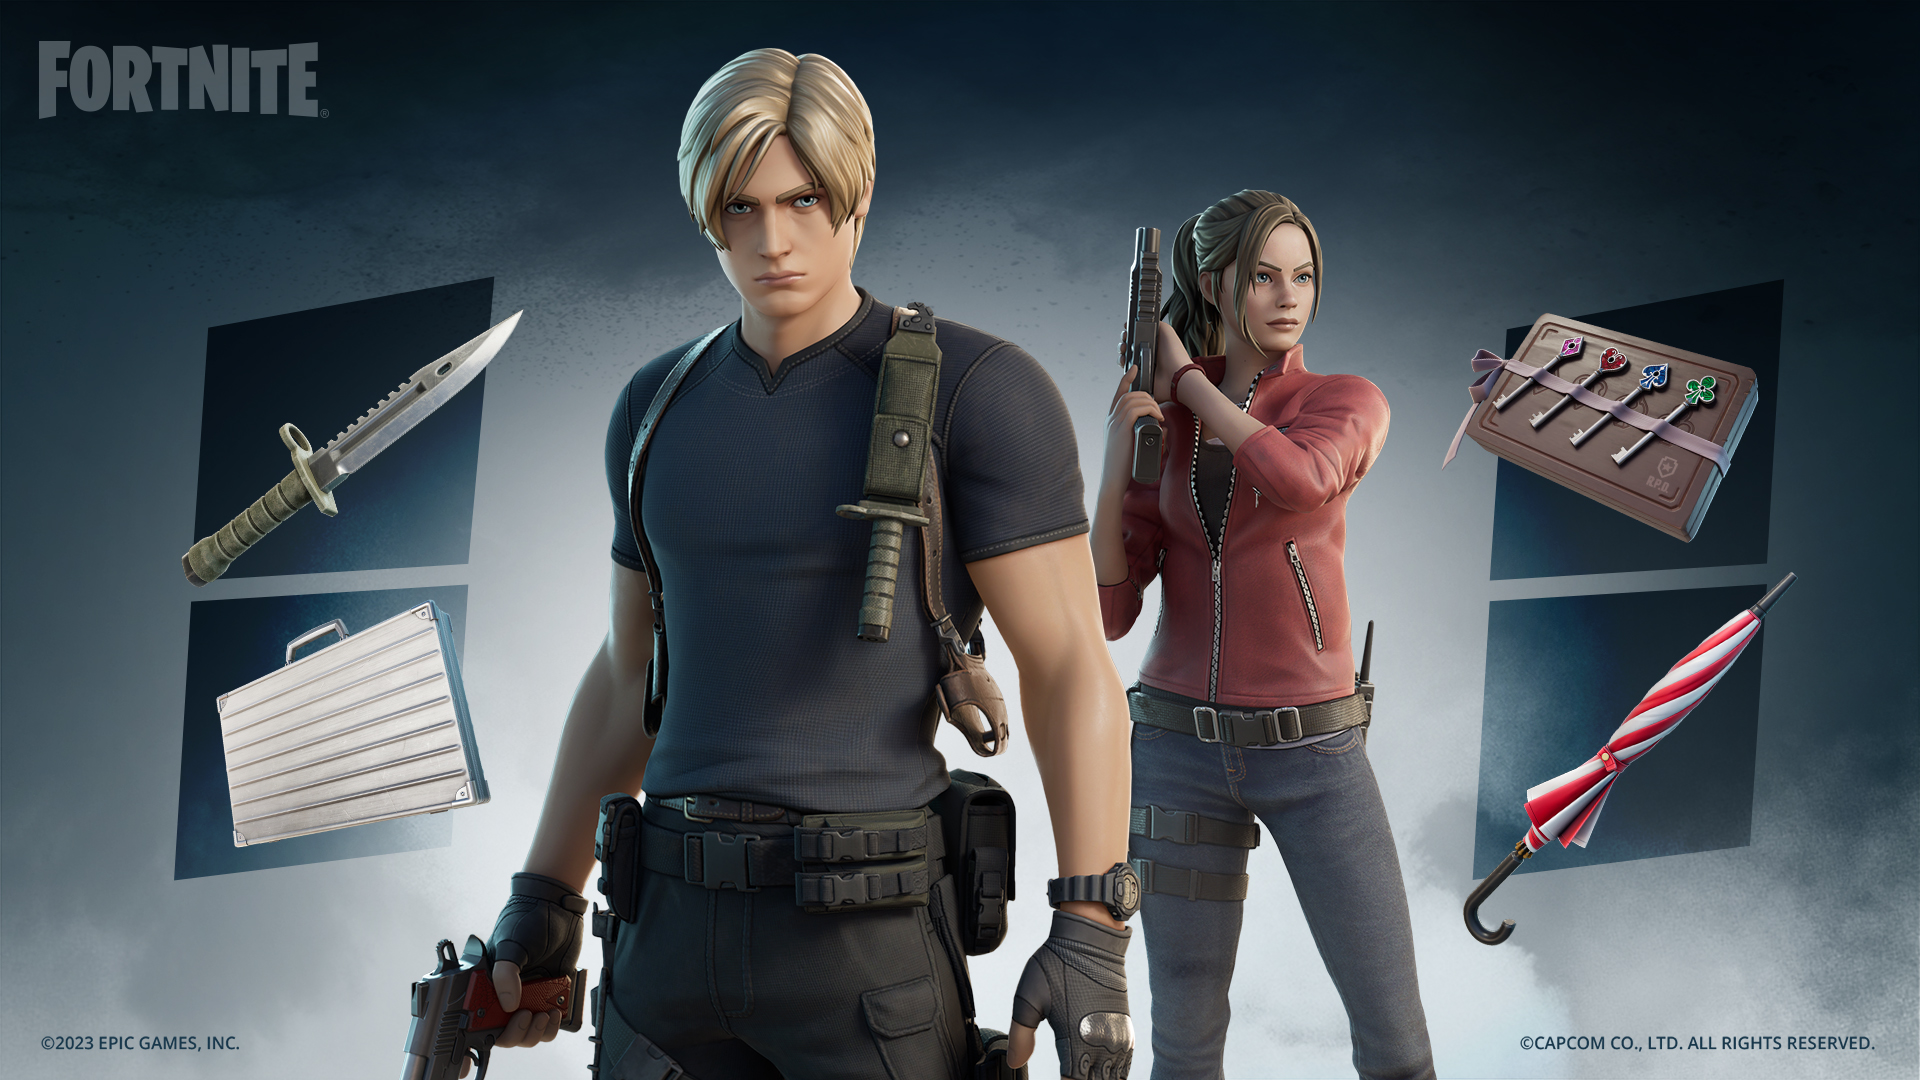 How To Play Resident Evil 4 Remake On Xbox Right Now - GameSpot